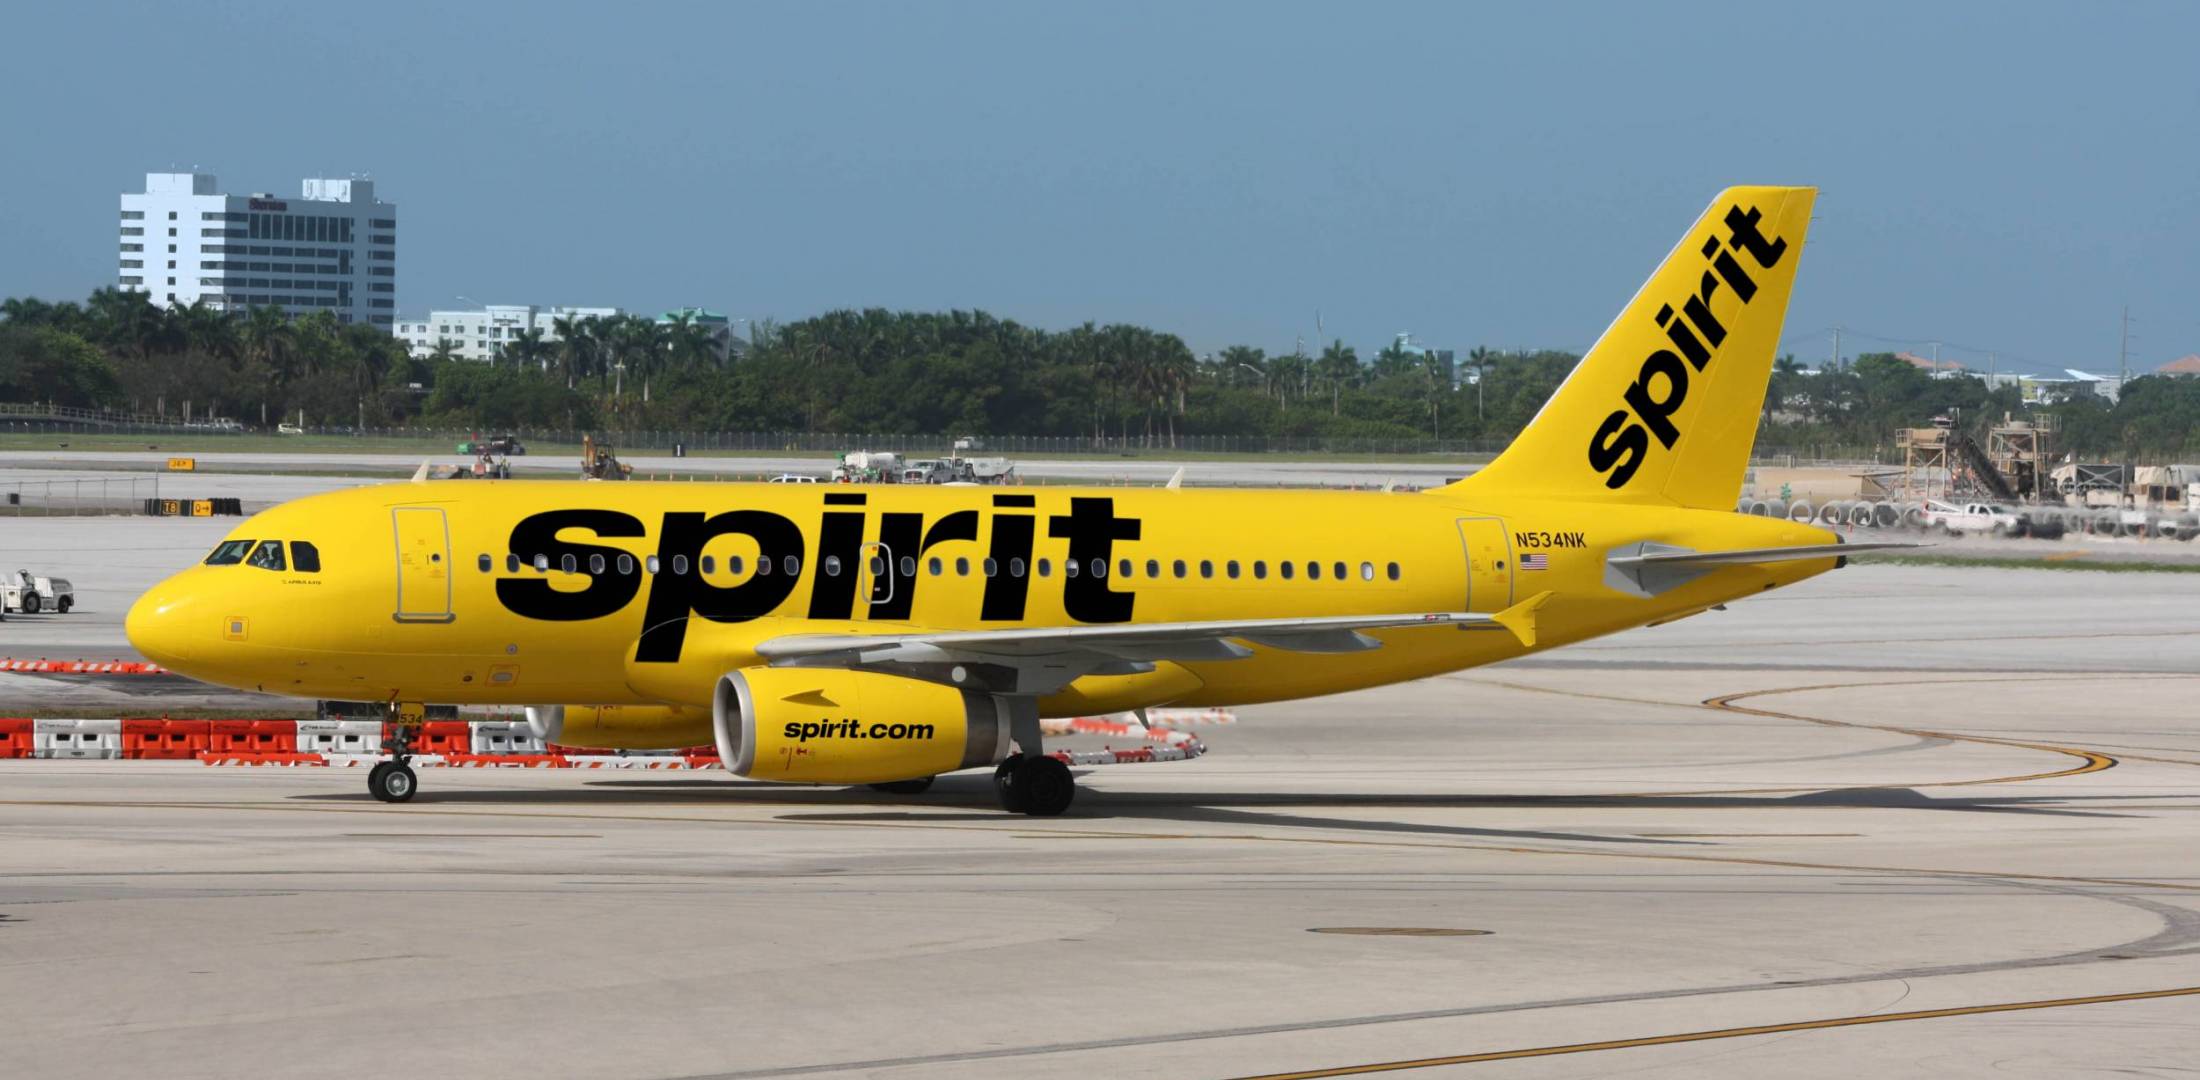 Spirit Airlines Airbus A319 on taxiway